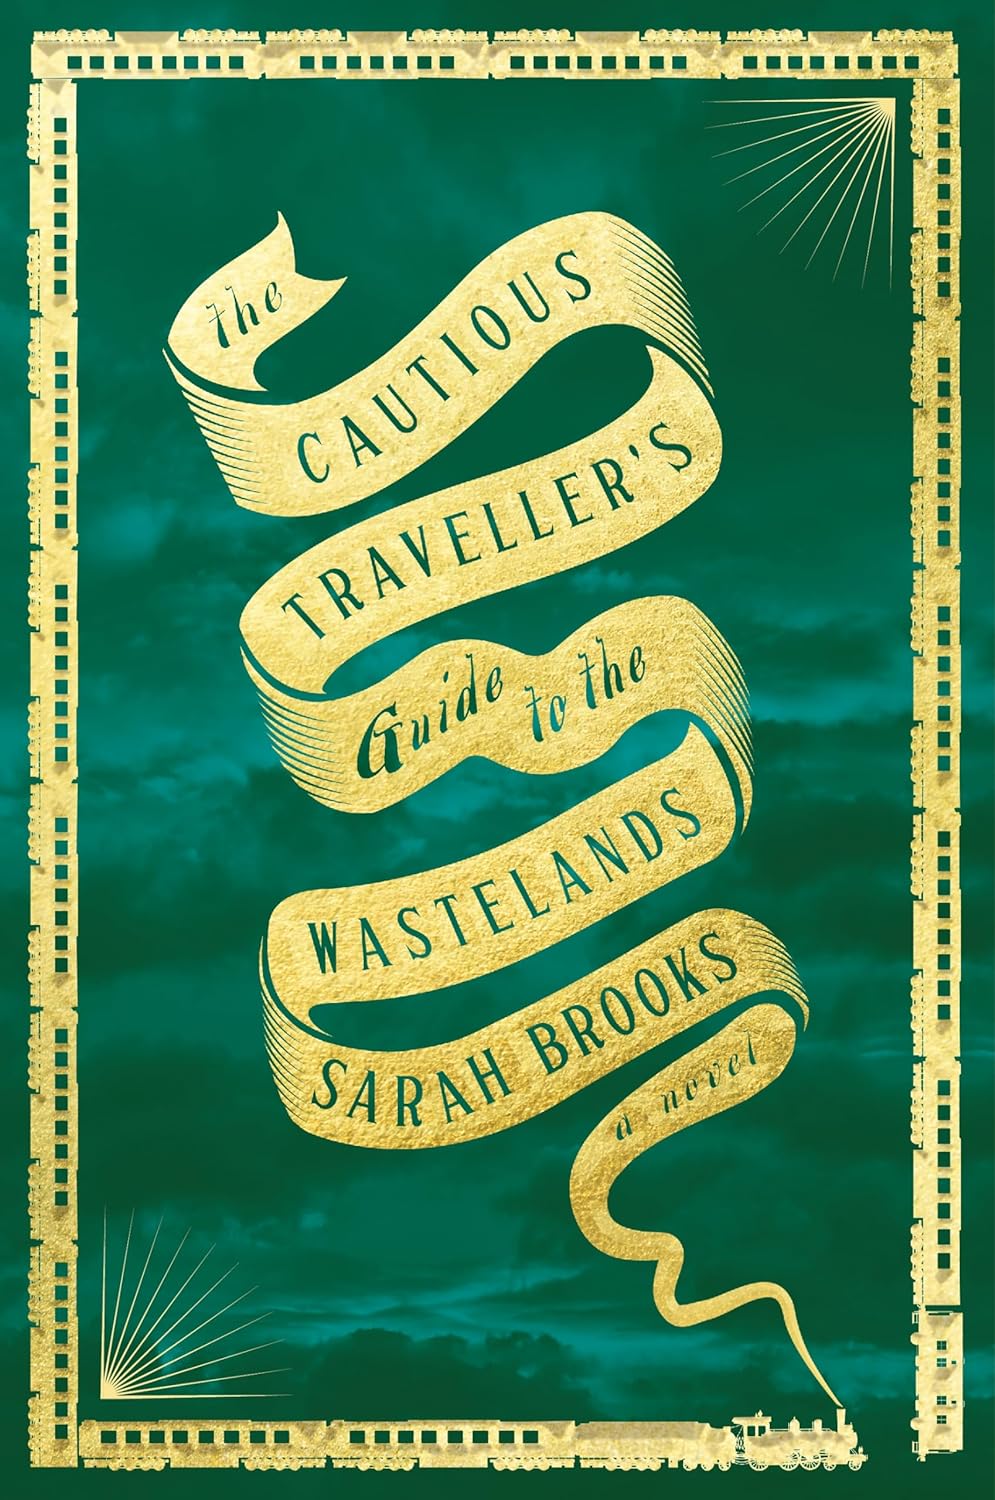 The Cautious Traveller's Guide to the Wastelands by Sarah Brooks